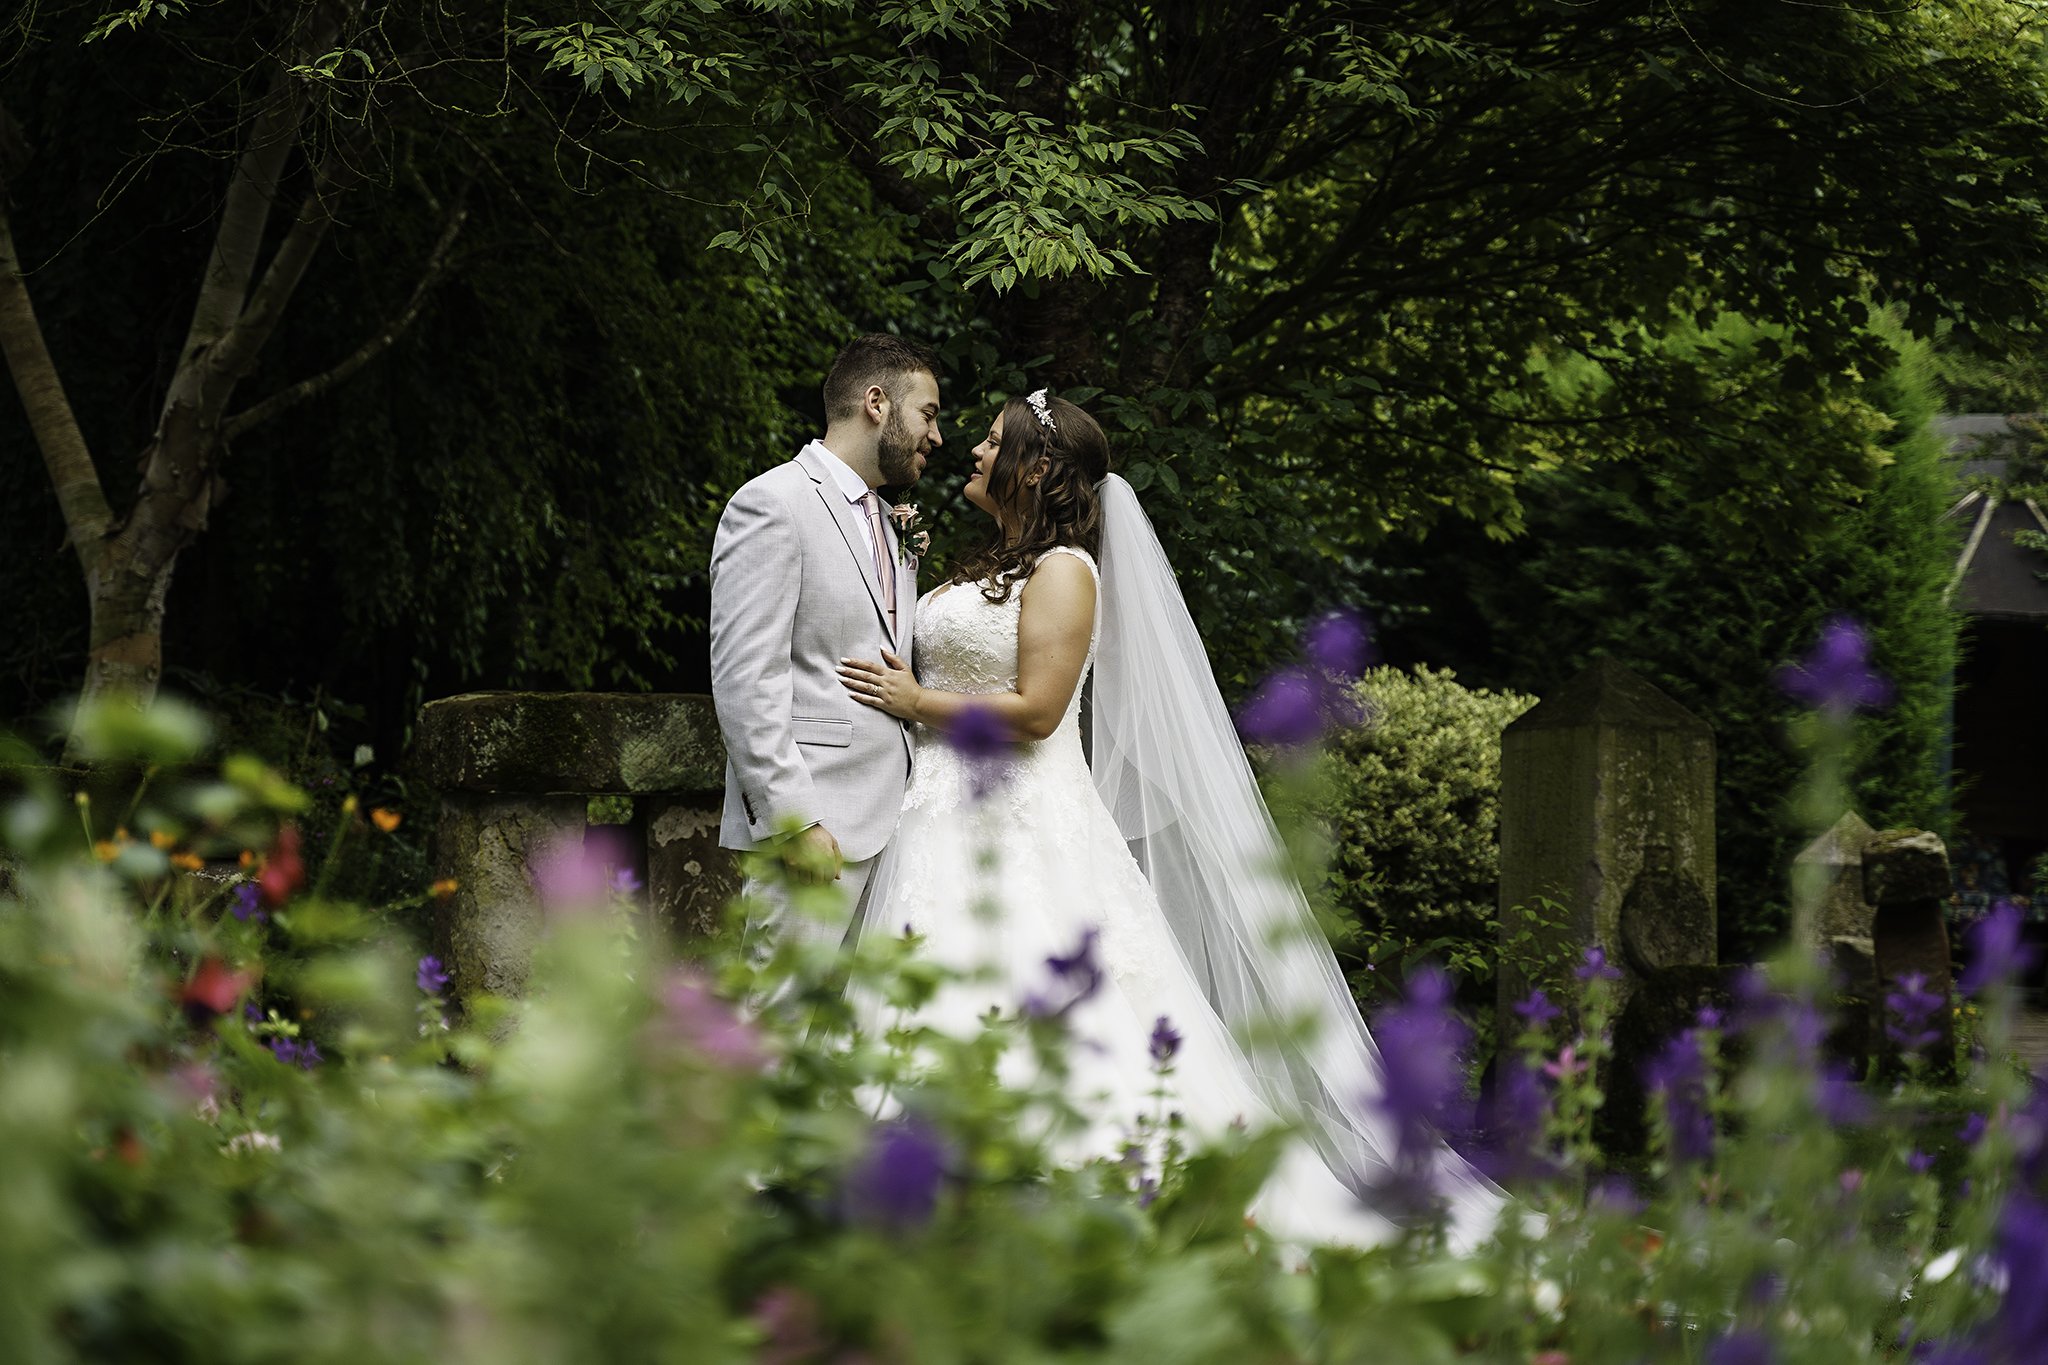  A bride and groom pose together in the gardens of the Hundred House Hotel in Shropshire, after their wedding 